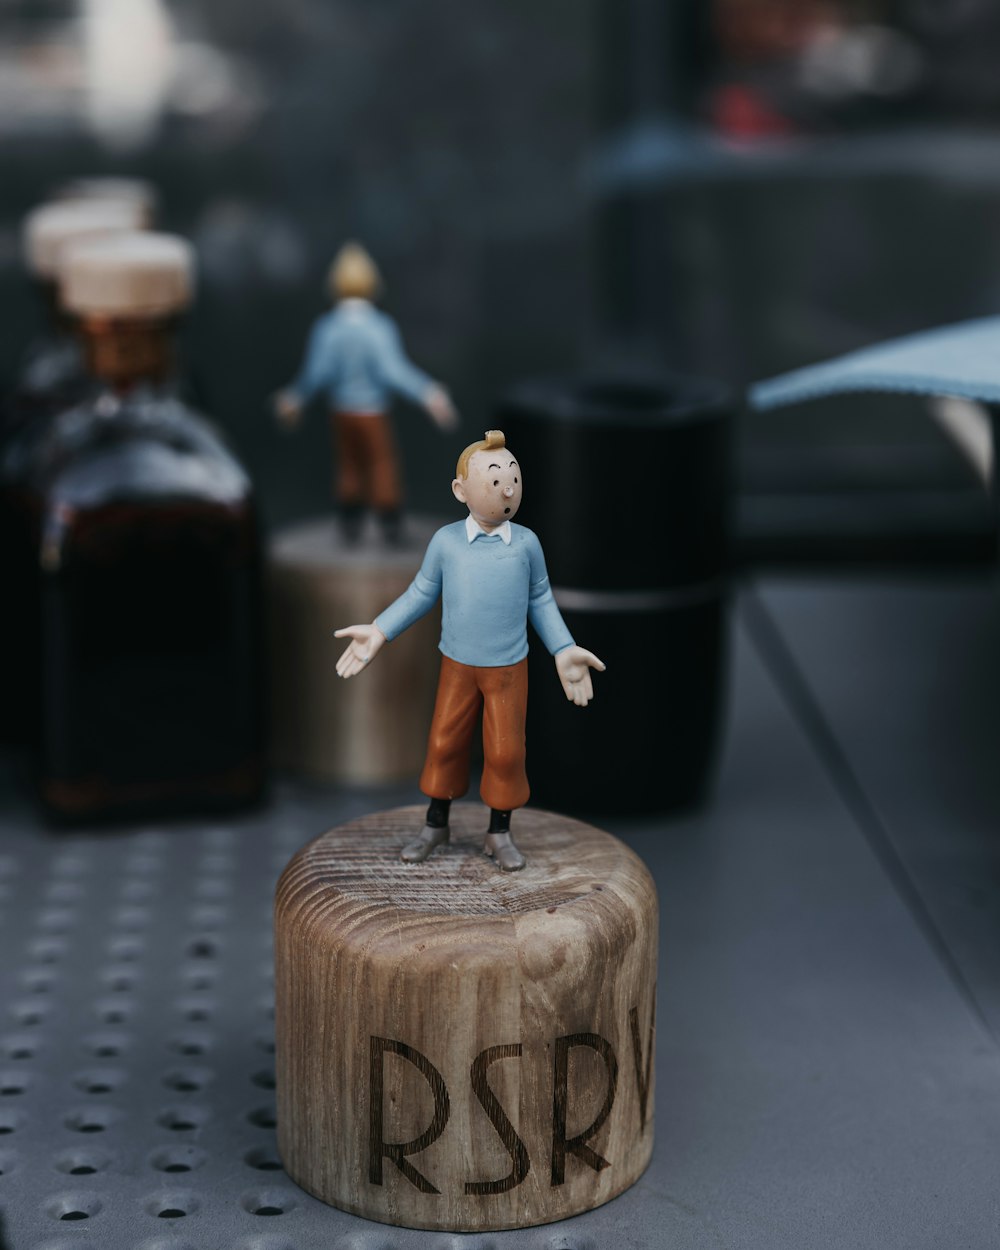 a small figurine of a person standing on top of a wooden block